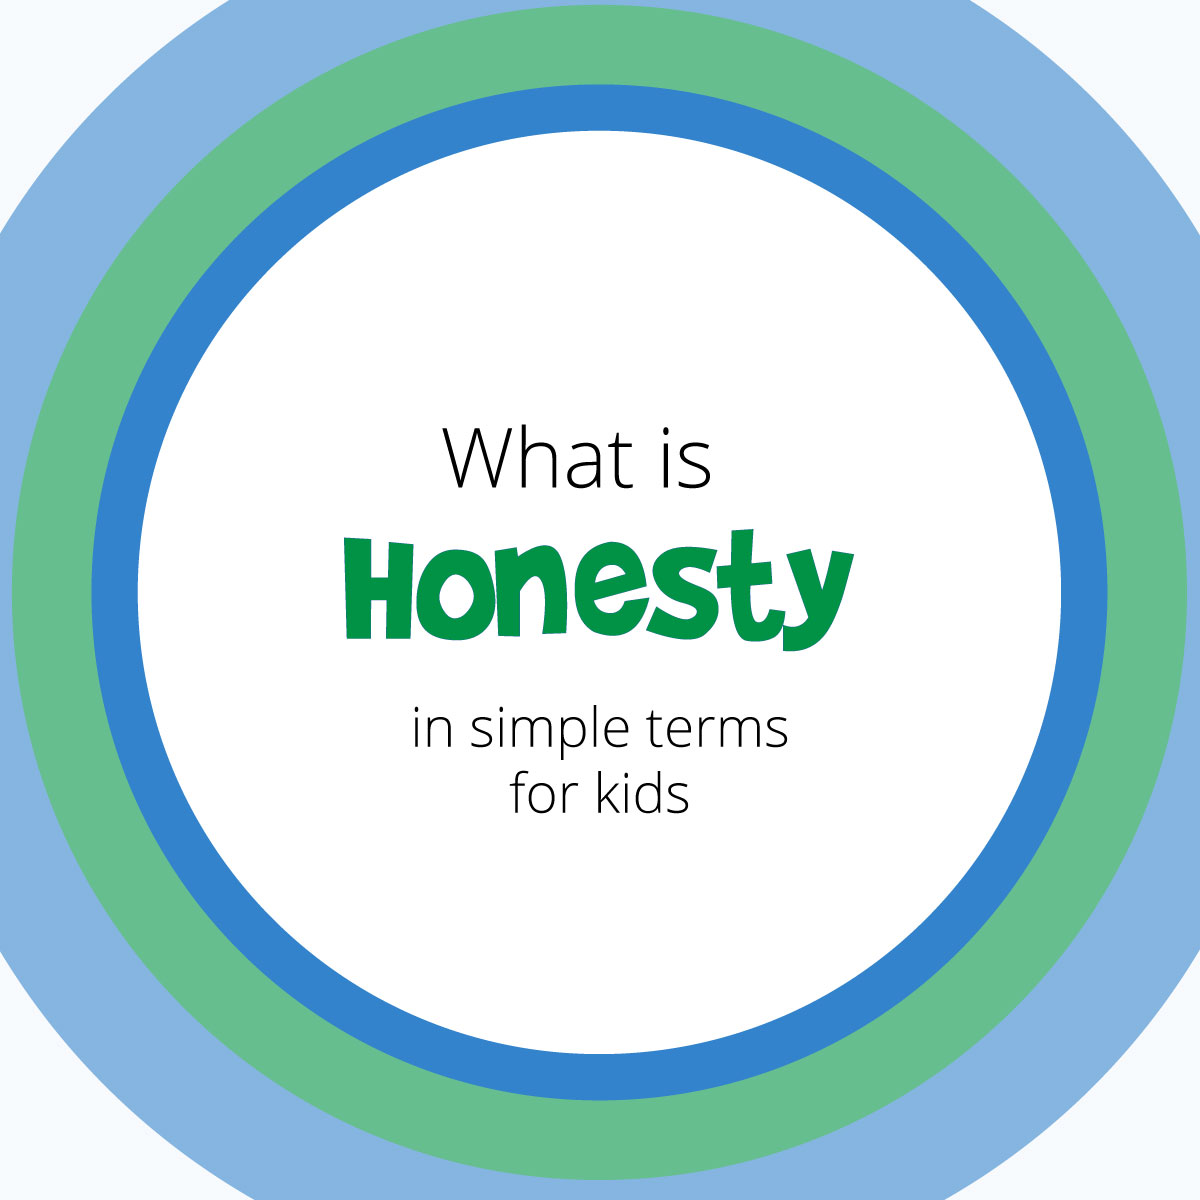 What is honesty? Definition for kids